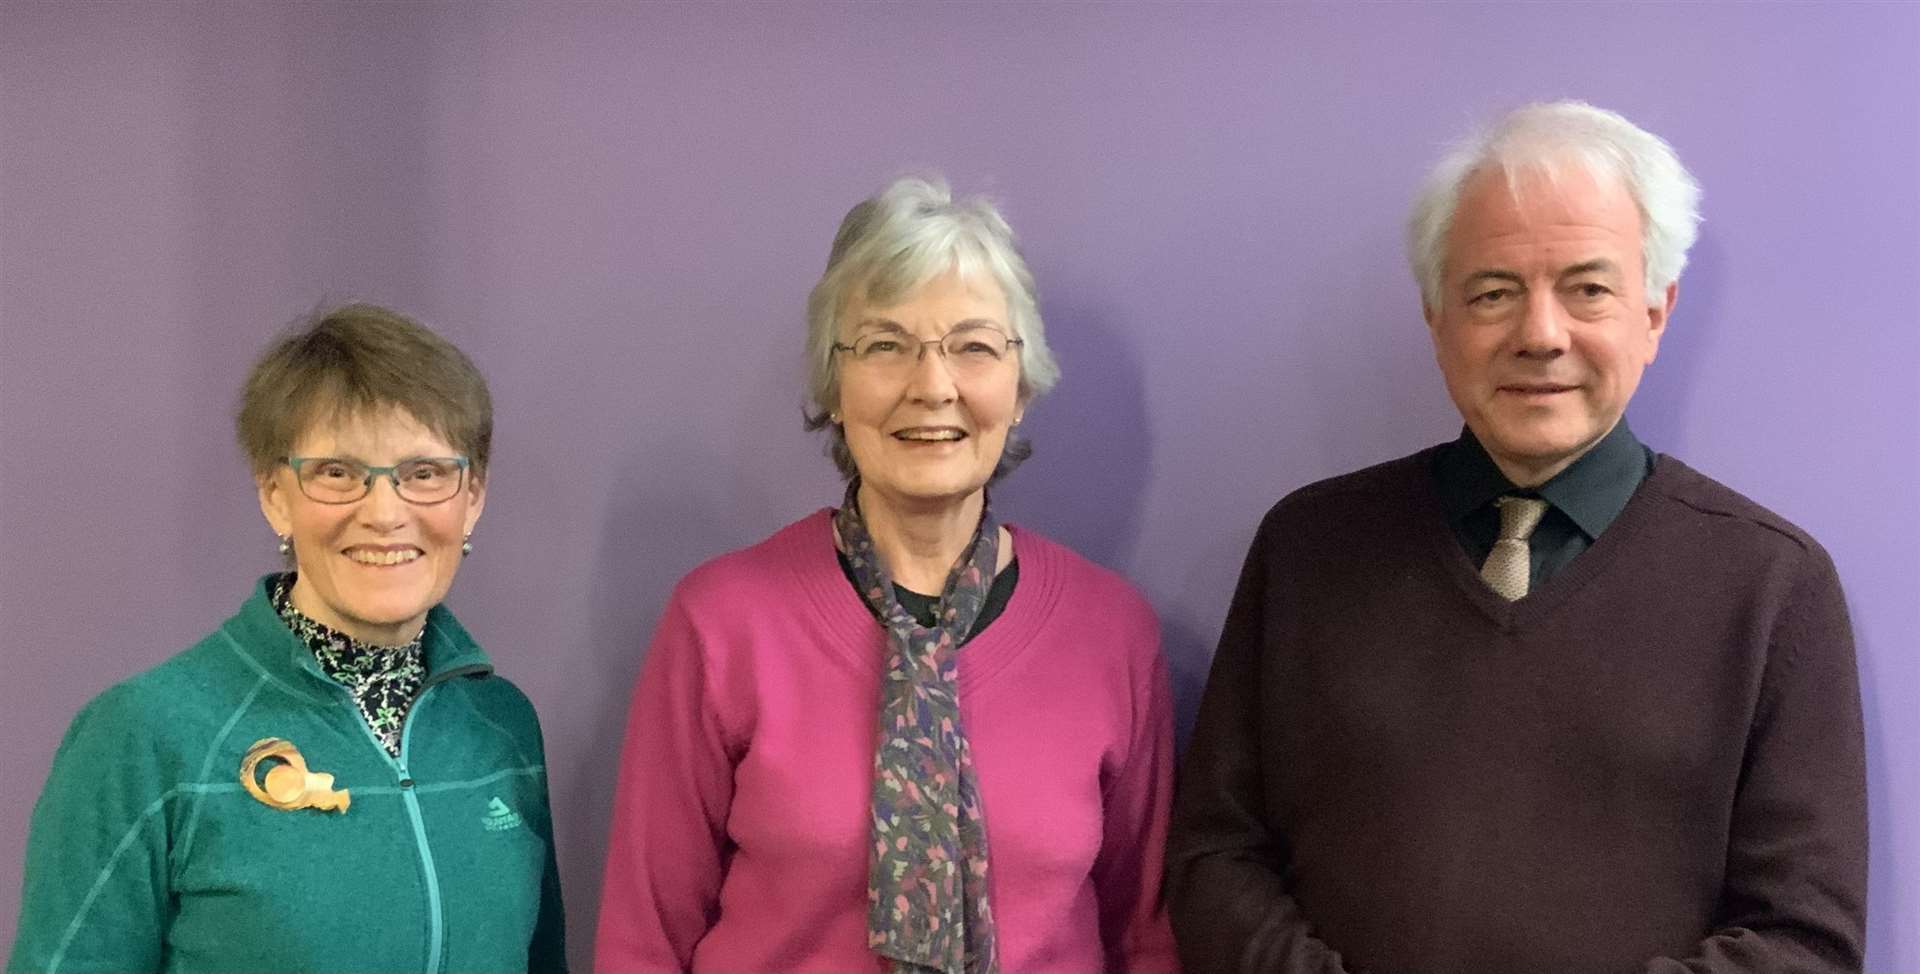 Inverness Choral Society's Carol Brown, Fran Tilbrook and conductor Gordon Tocher.